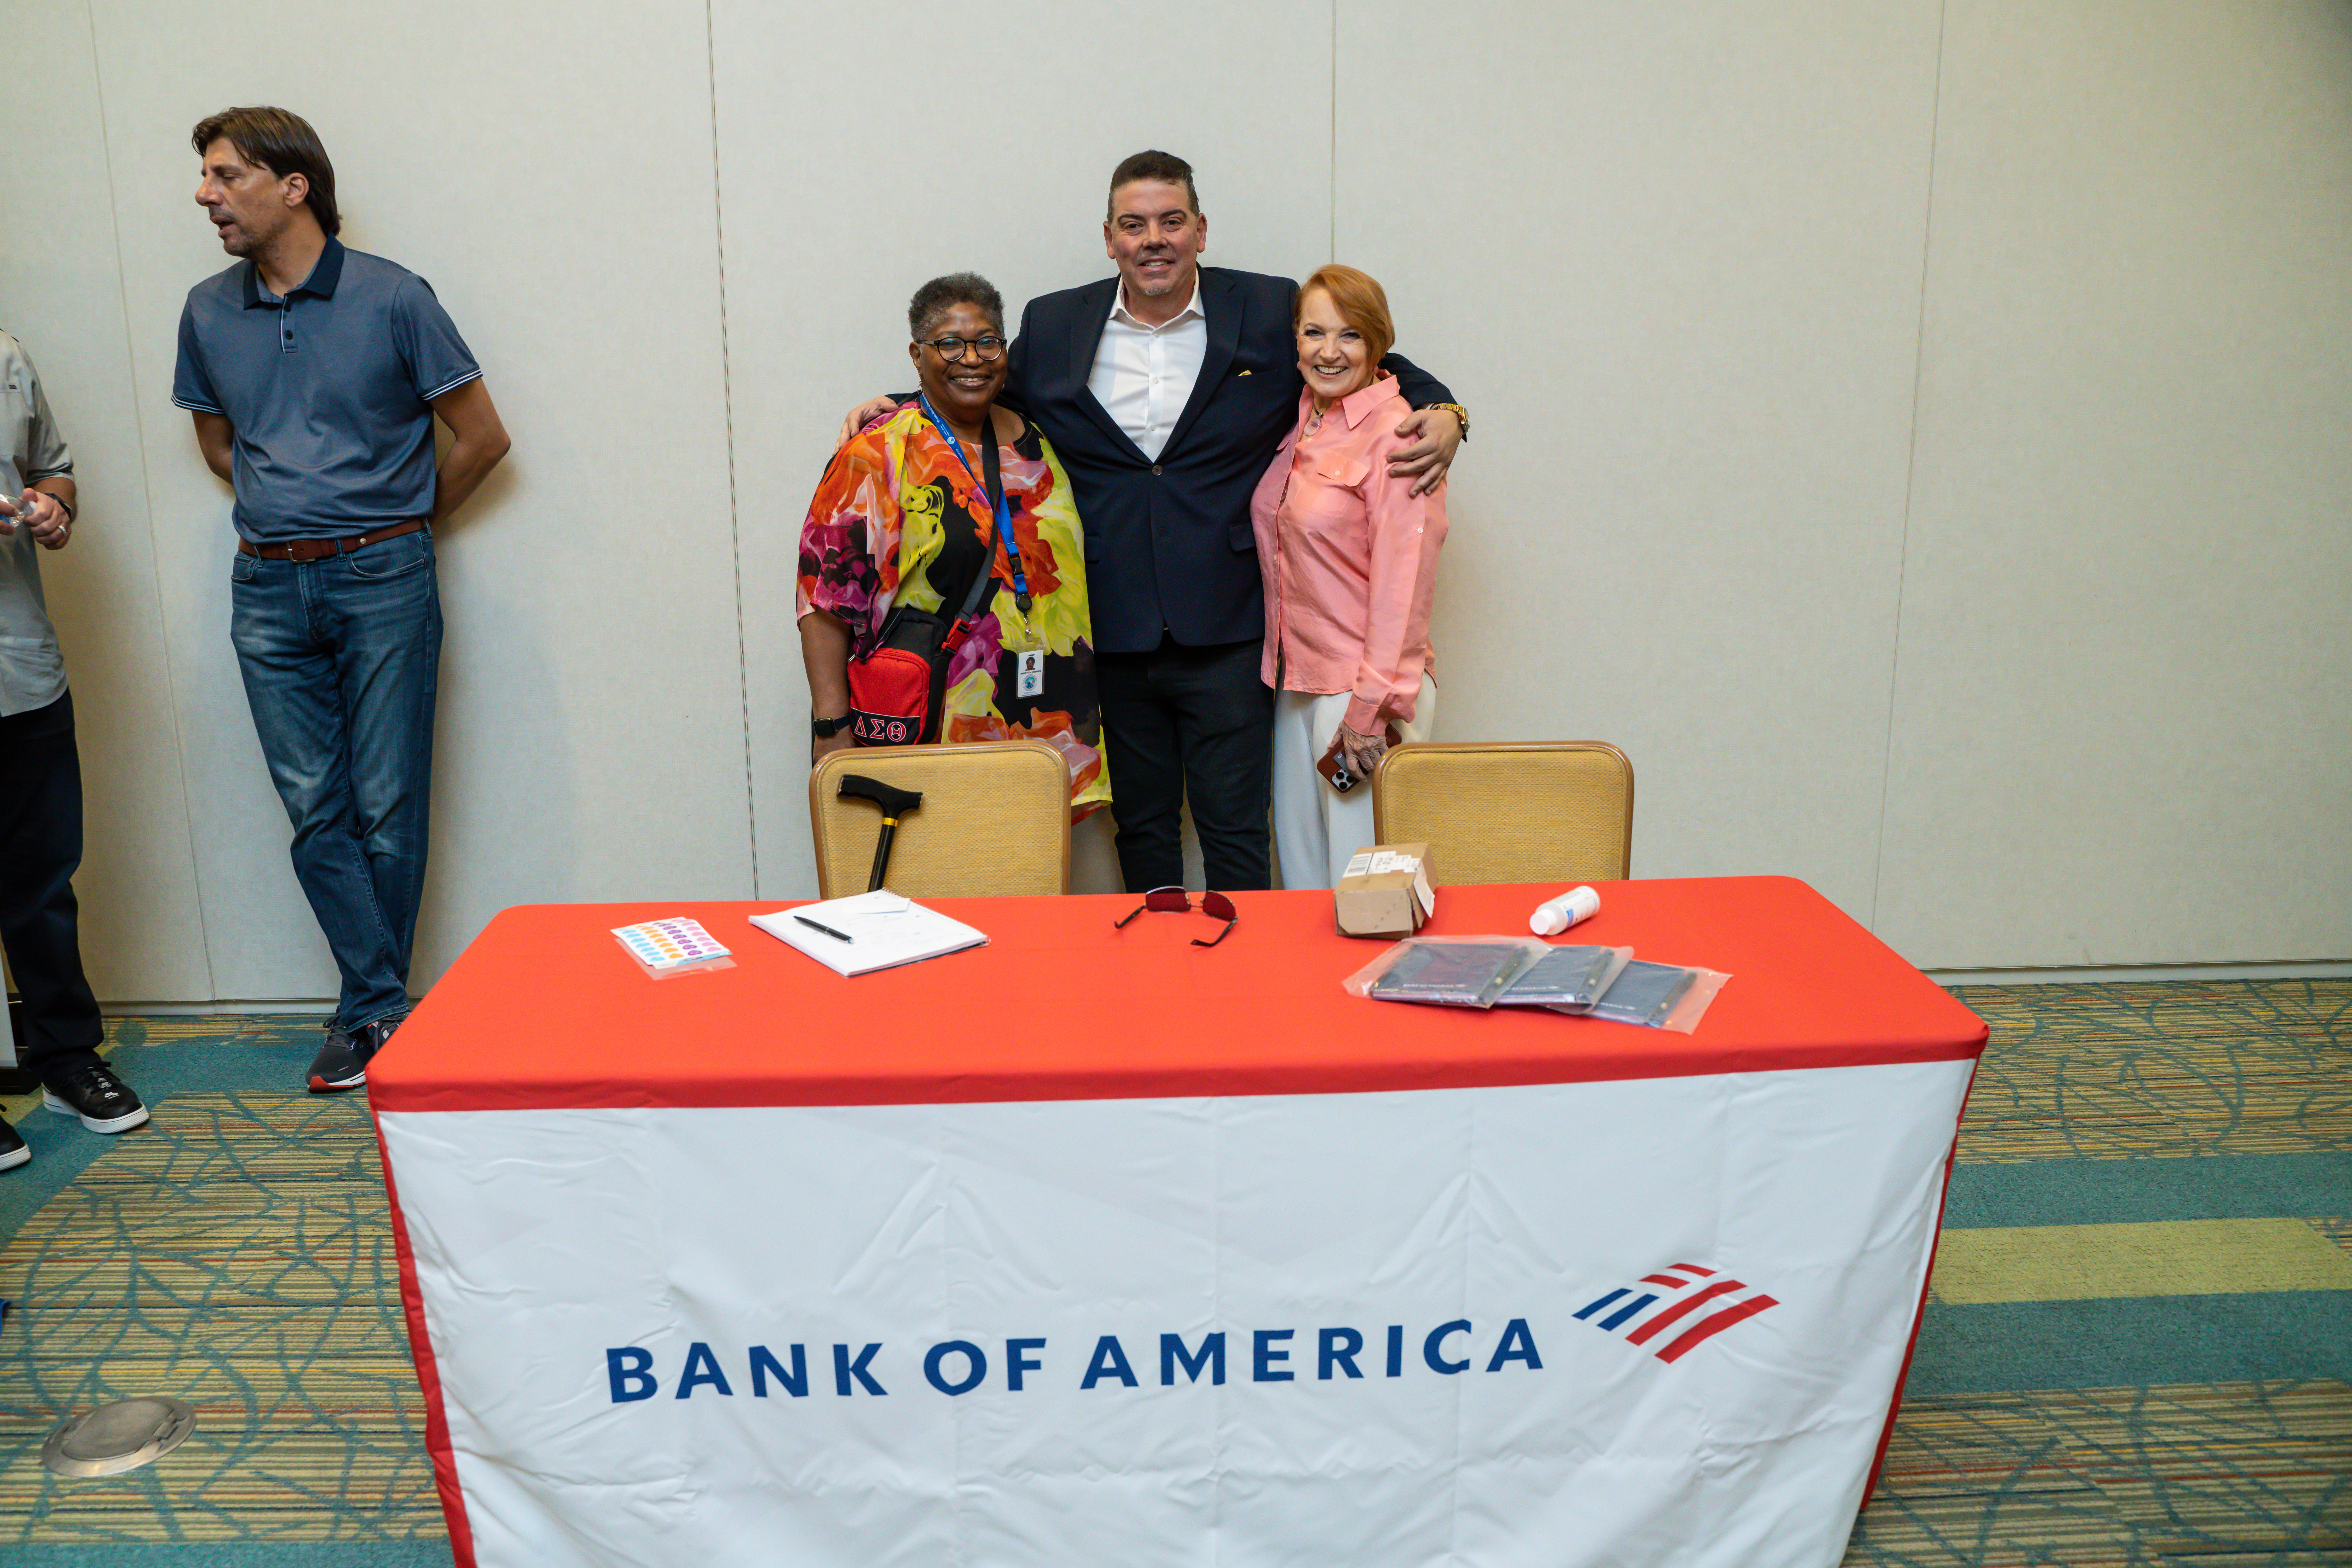 Bank of America Table